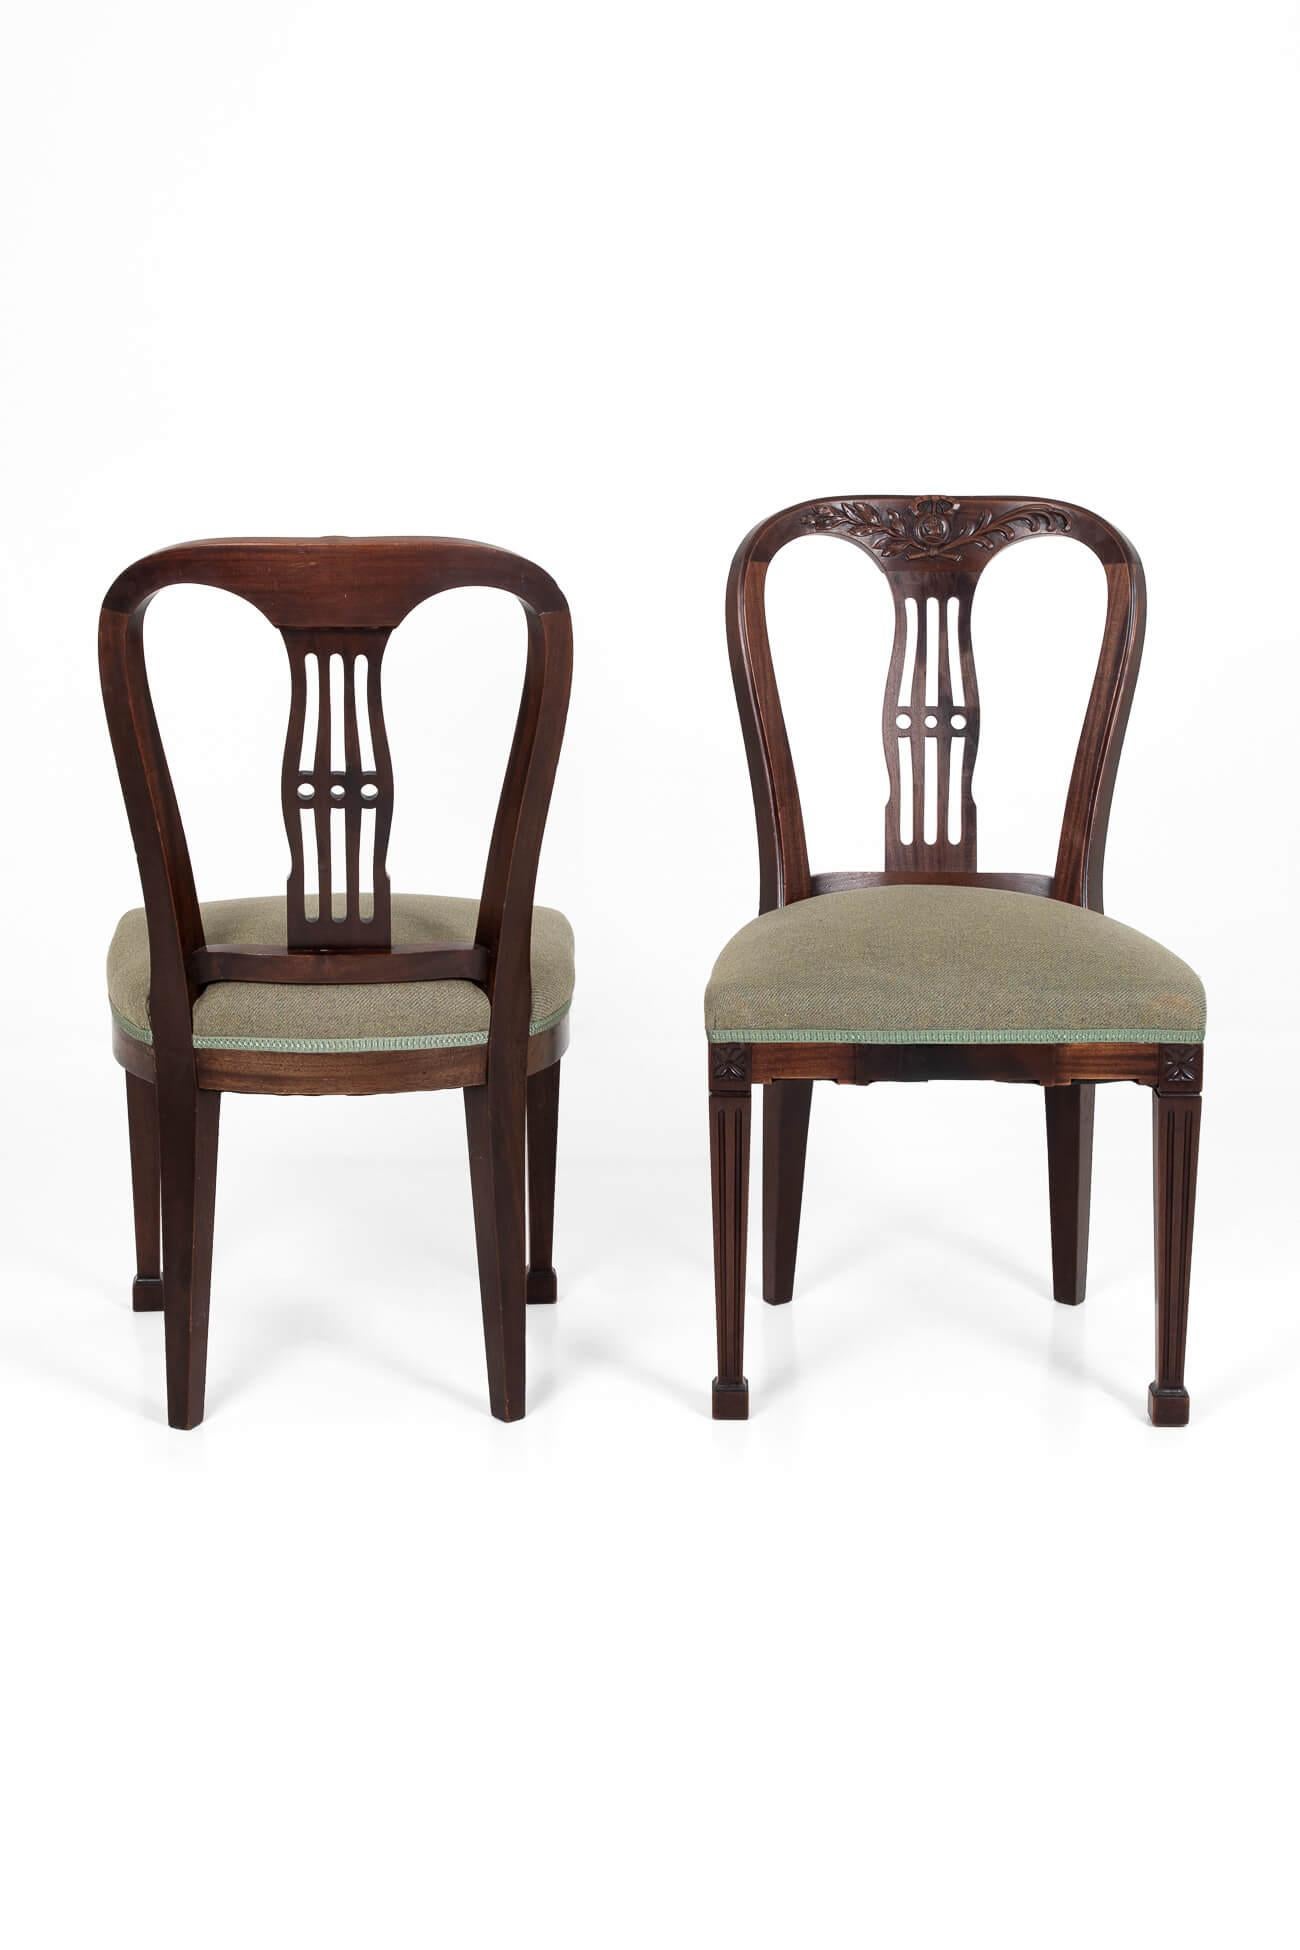 British Set of 19th Century Mahogany Victorian Dining Chairs, circa 1860 For Sale